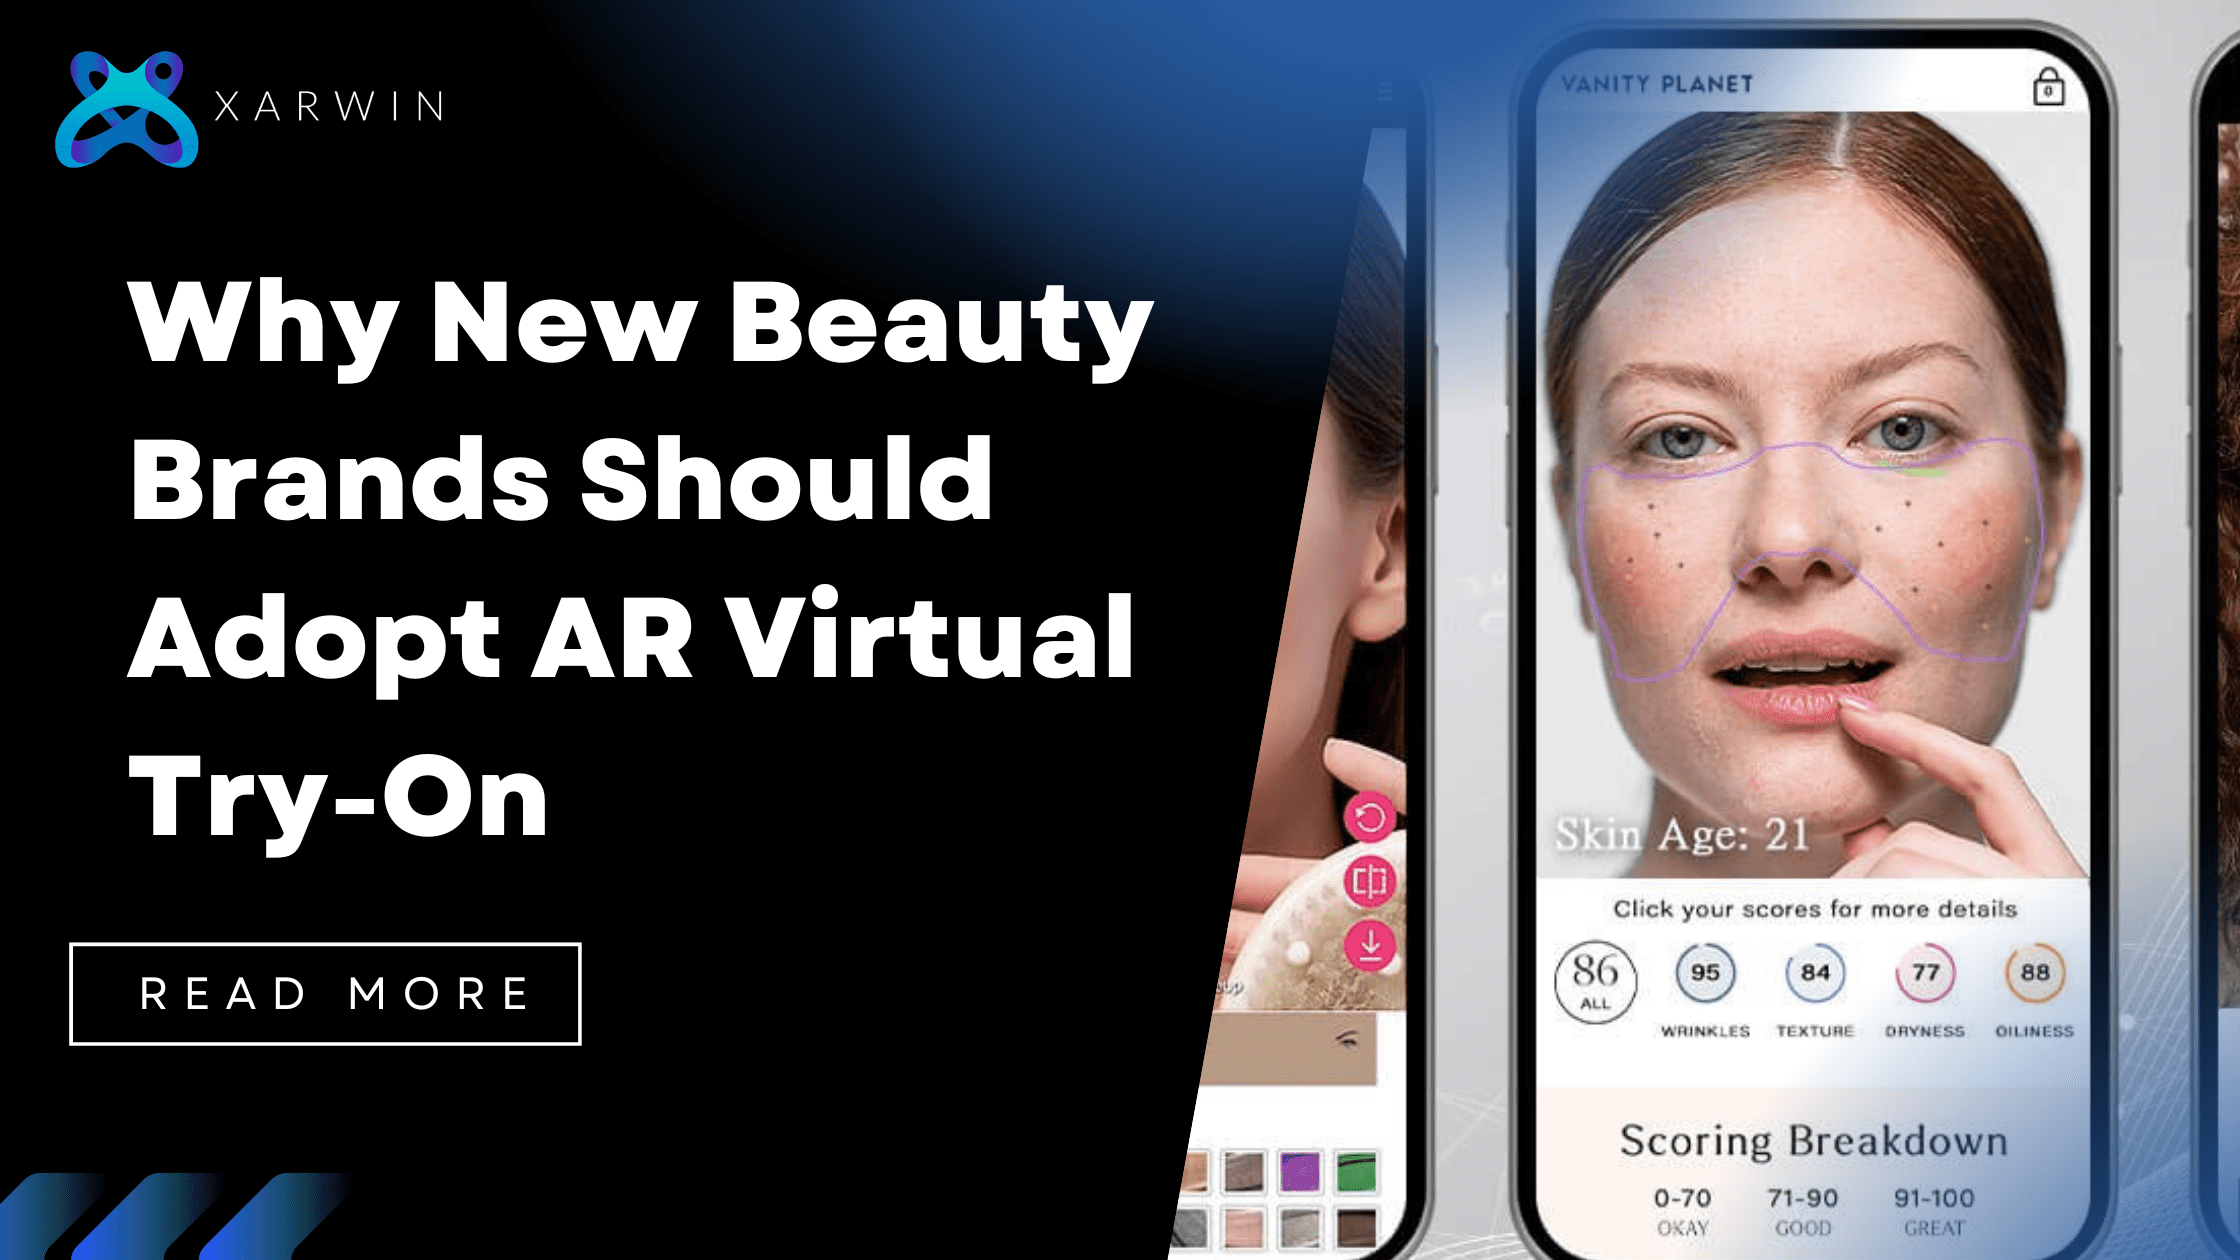 Why New Beauty Brands Should Adopt AR Virtual Try-On